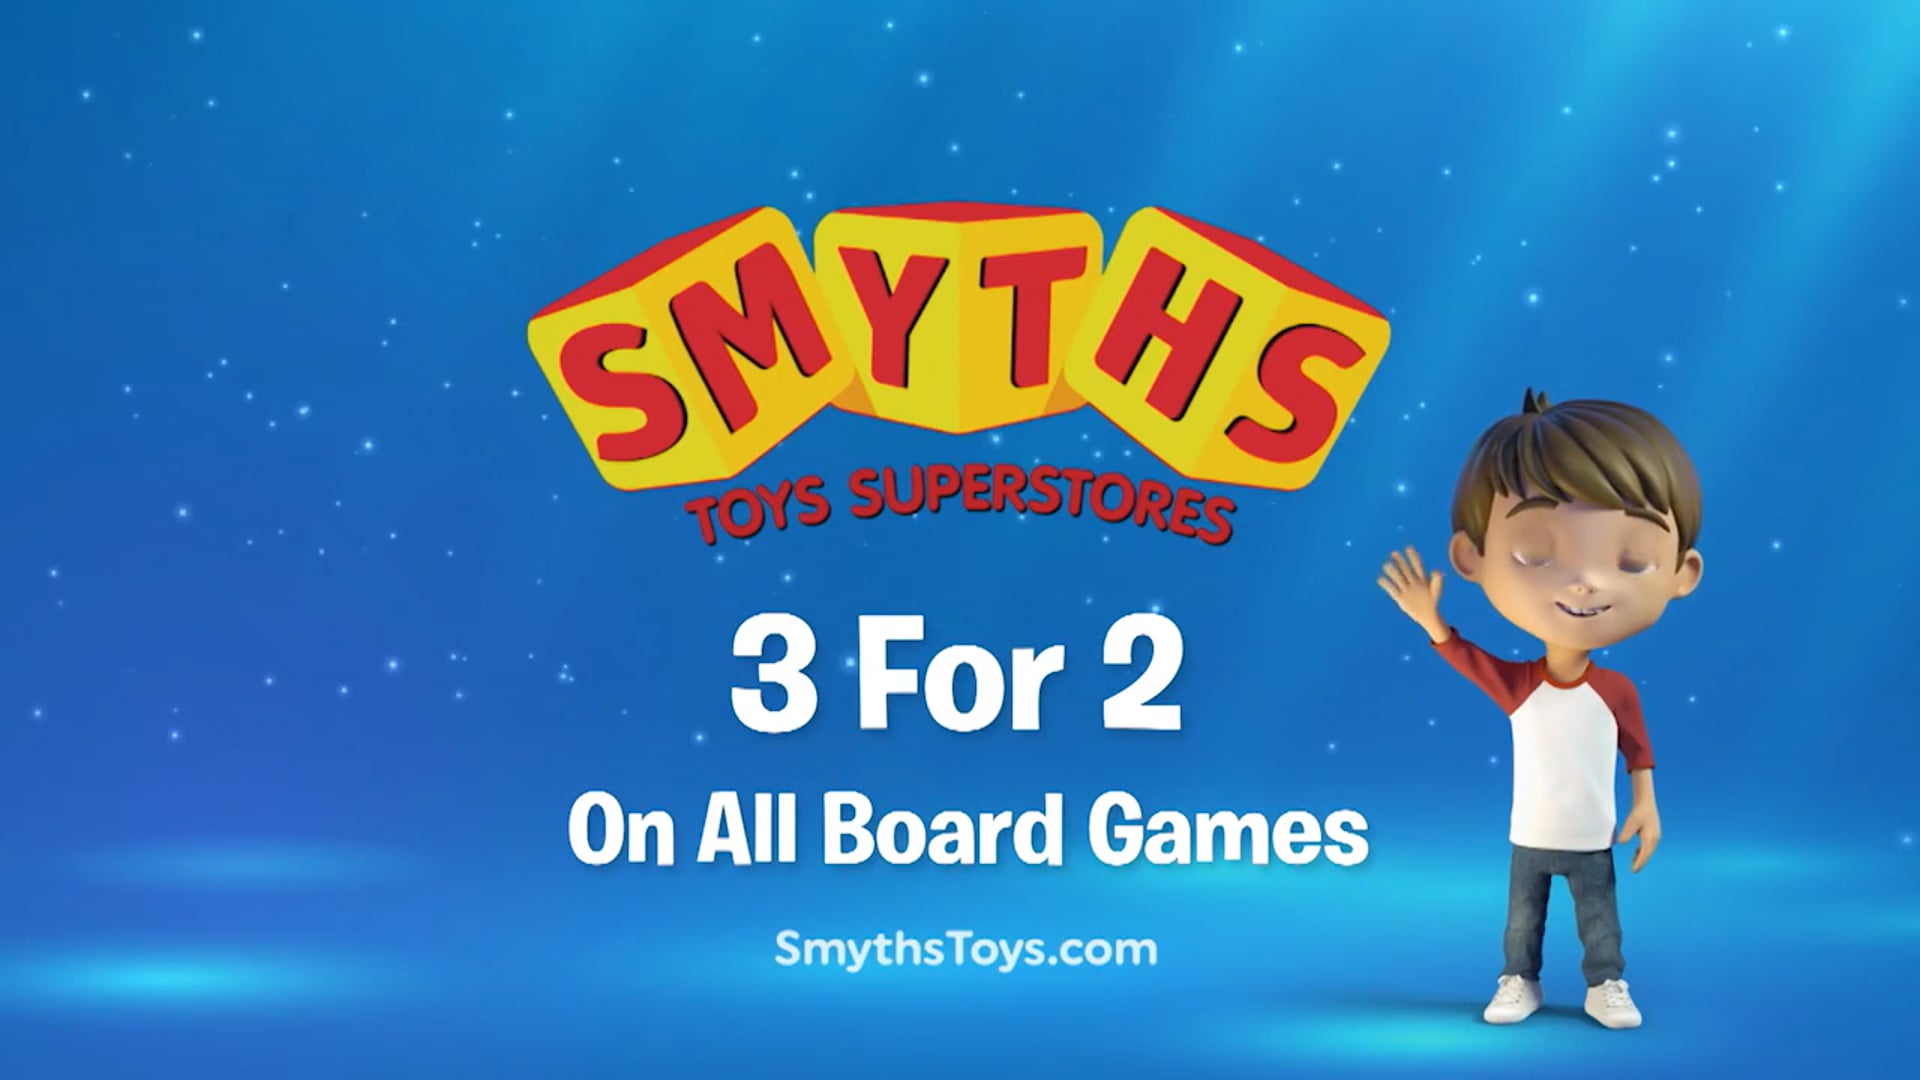 3 for 2 On All Board Games - Smyths Toys